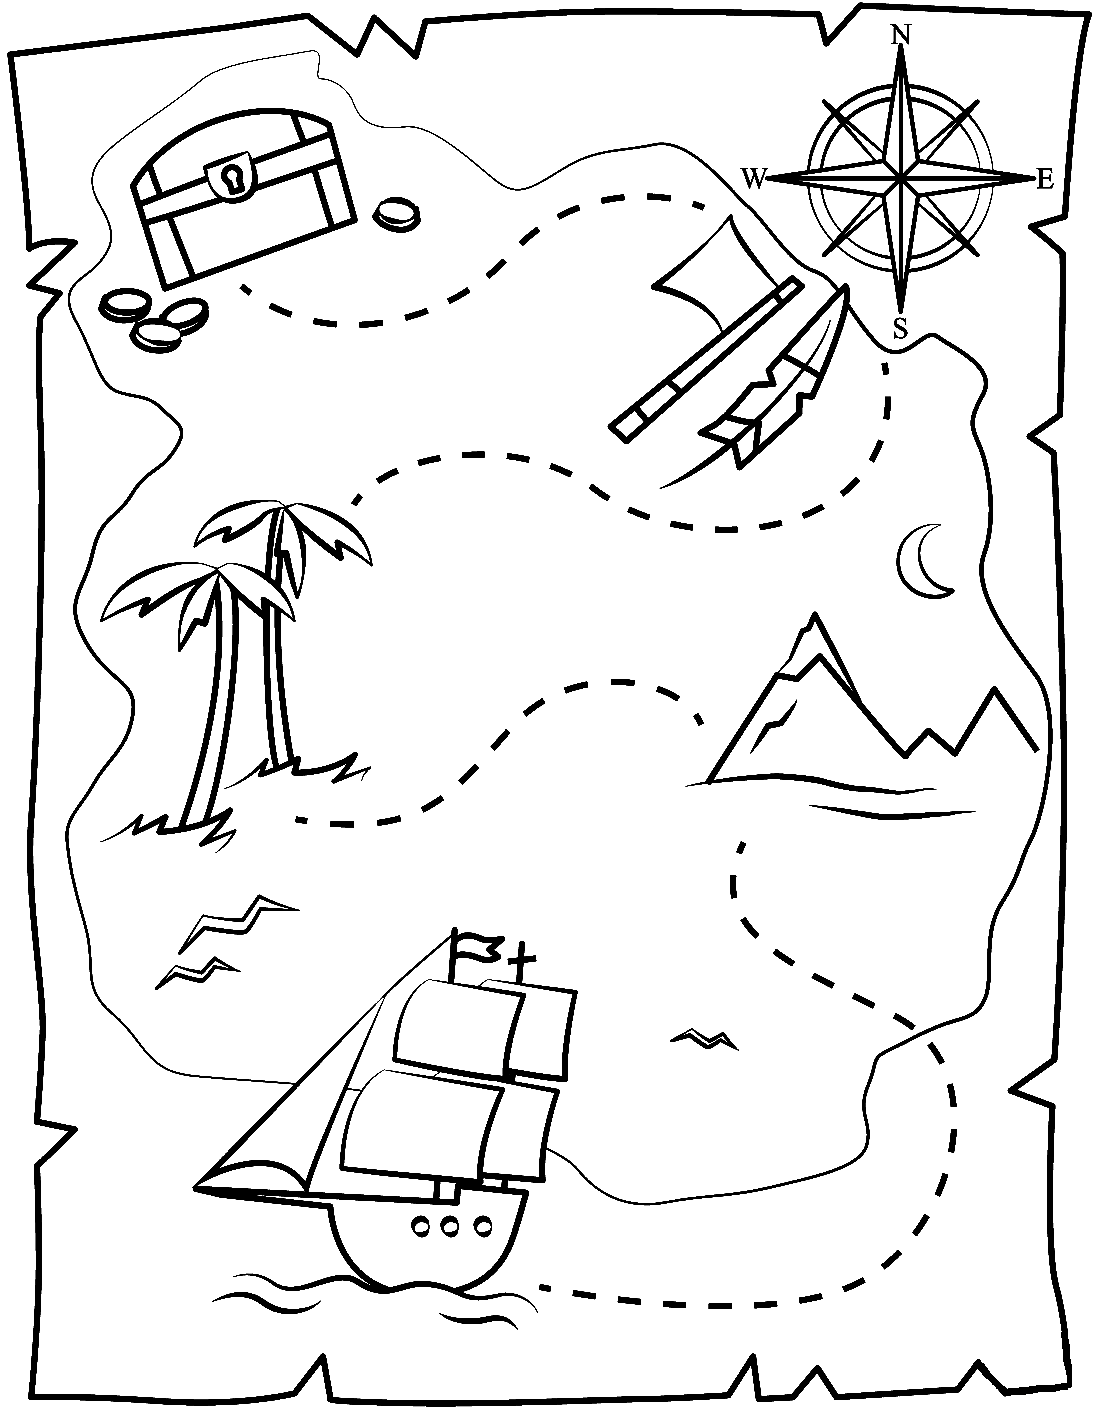 Treasure Chest Map Coloring Page